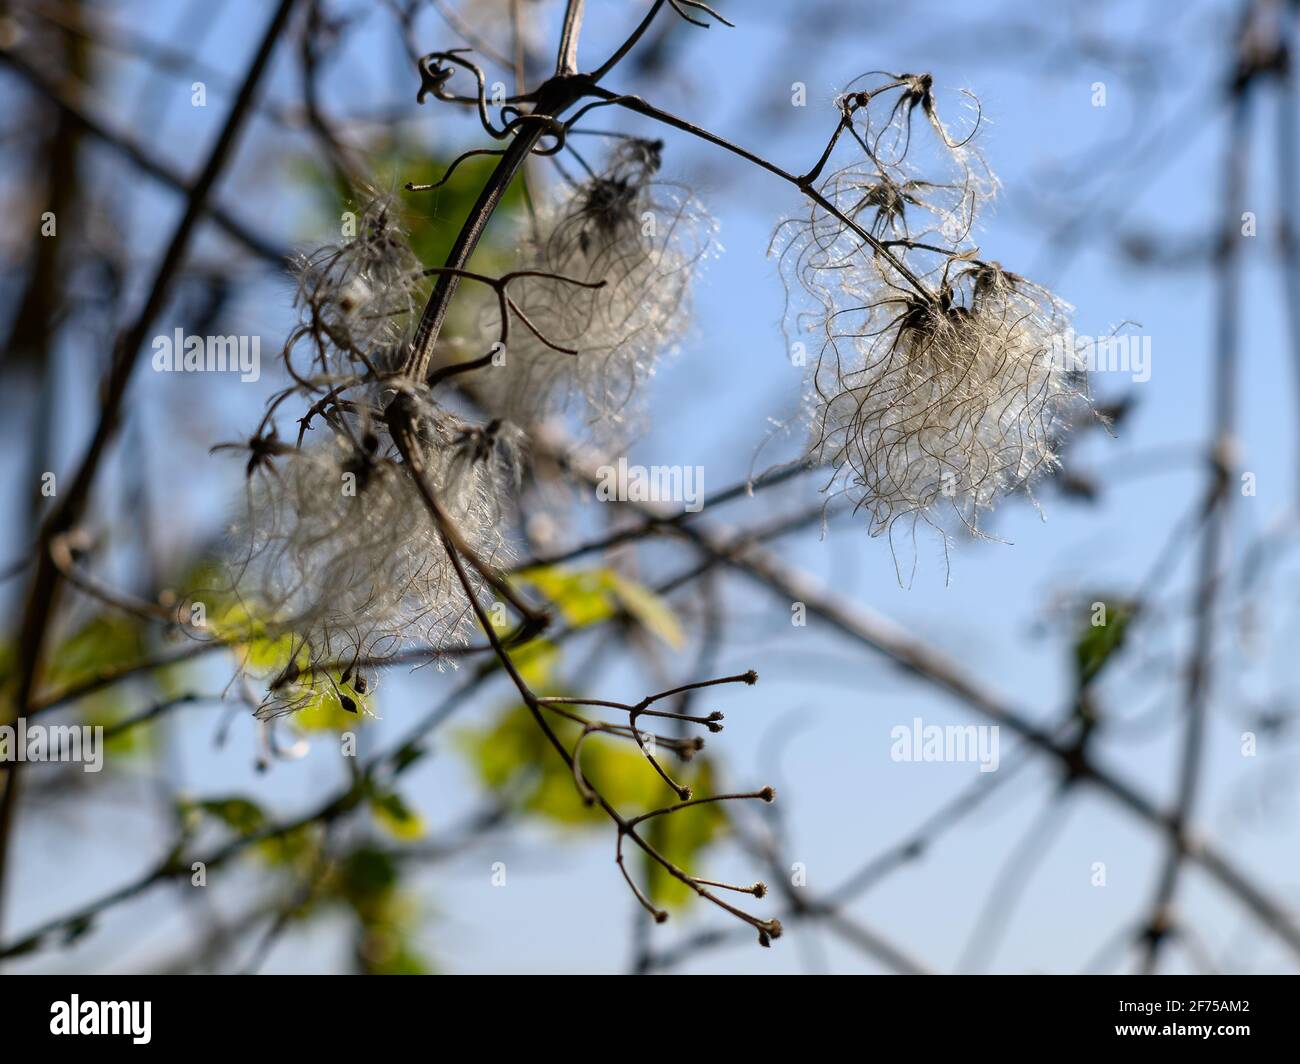 Fluffy white seeds of Wild Clematis, known as Traveller's Joy, in a hedgerow in spring, UK Stock Photo